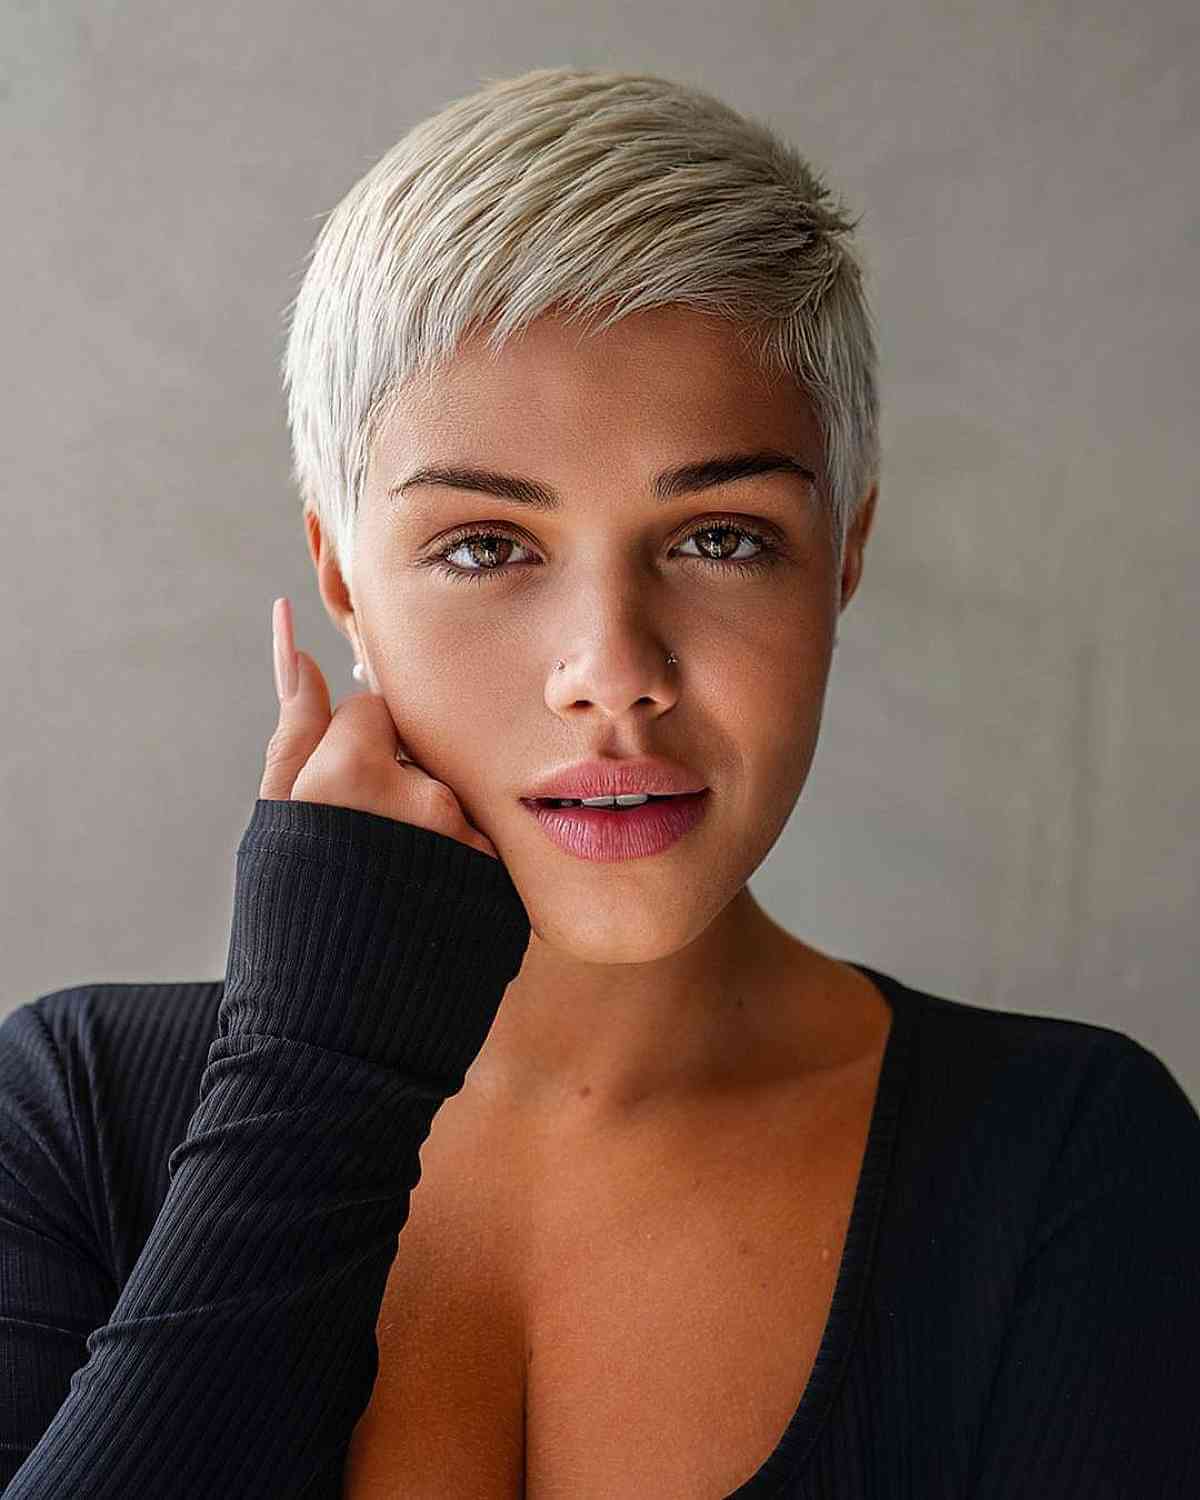 51 Top Short Hairstyles for Thick Hair to Be More Manageable